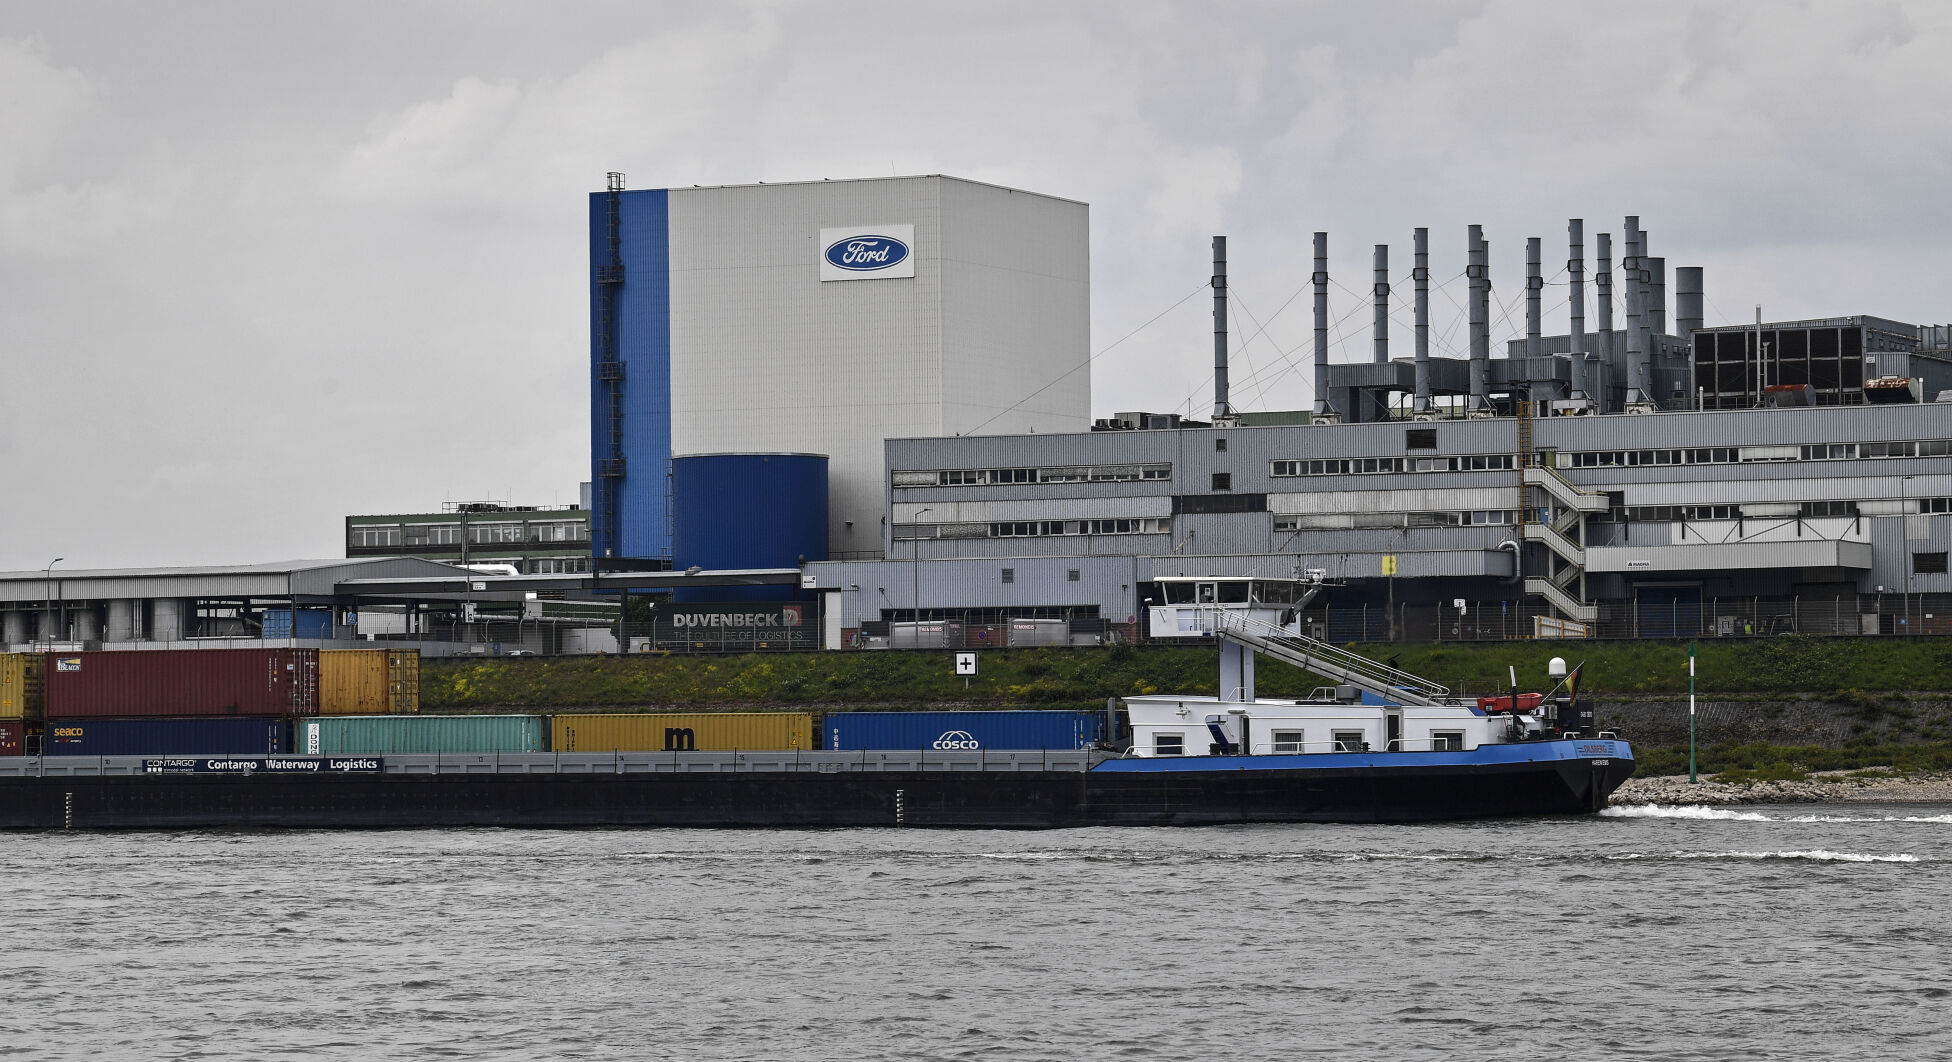 <p>FILE - A container ship passes the Ford car plant in Cologne, Germany, May 4, 2020. Ford said that it will cut 3,800 jobs in Europe over the next three years in an effort to streamline its operations as it contends with economic headwinds and increasing competition on electric cars. The automaker said that 2,300 jobs will go in Germany. (AP Photo/Martin Meissner, File)</p>   PHOTO CREDIT: Martin Meissner 